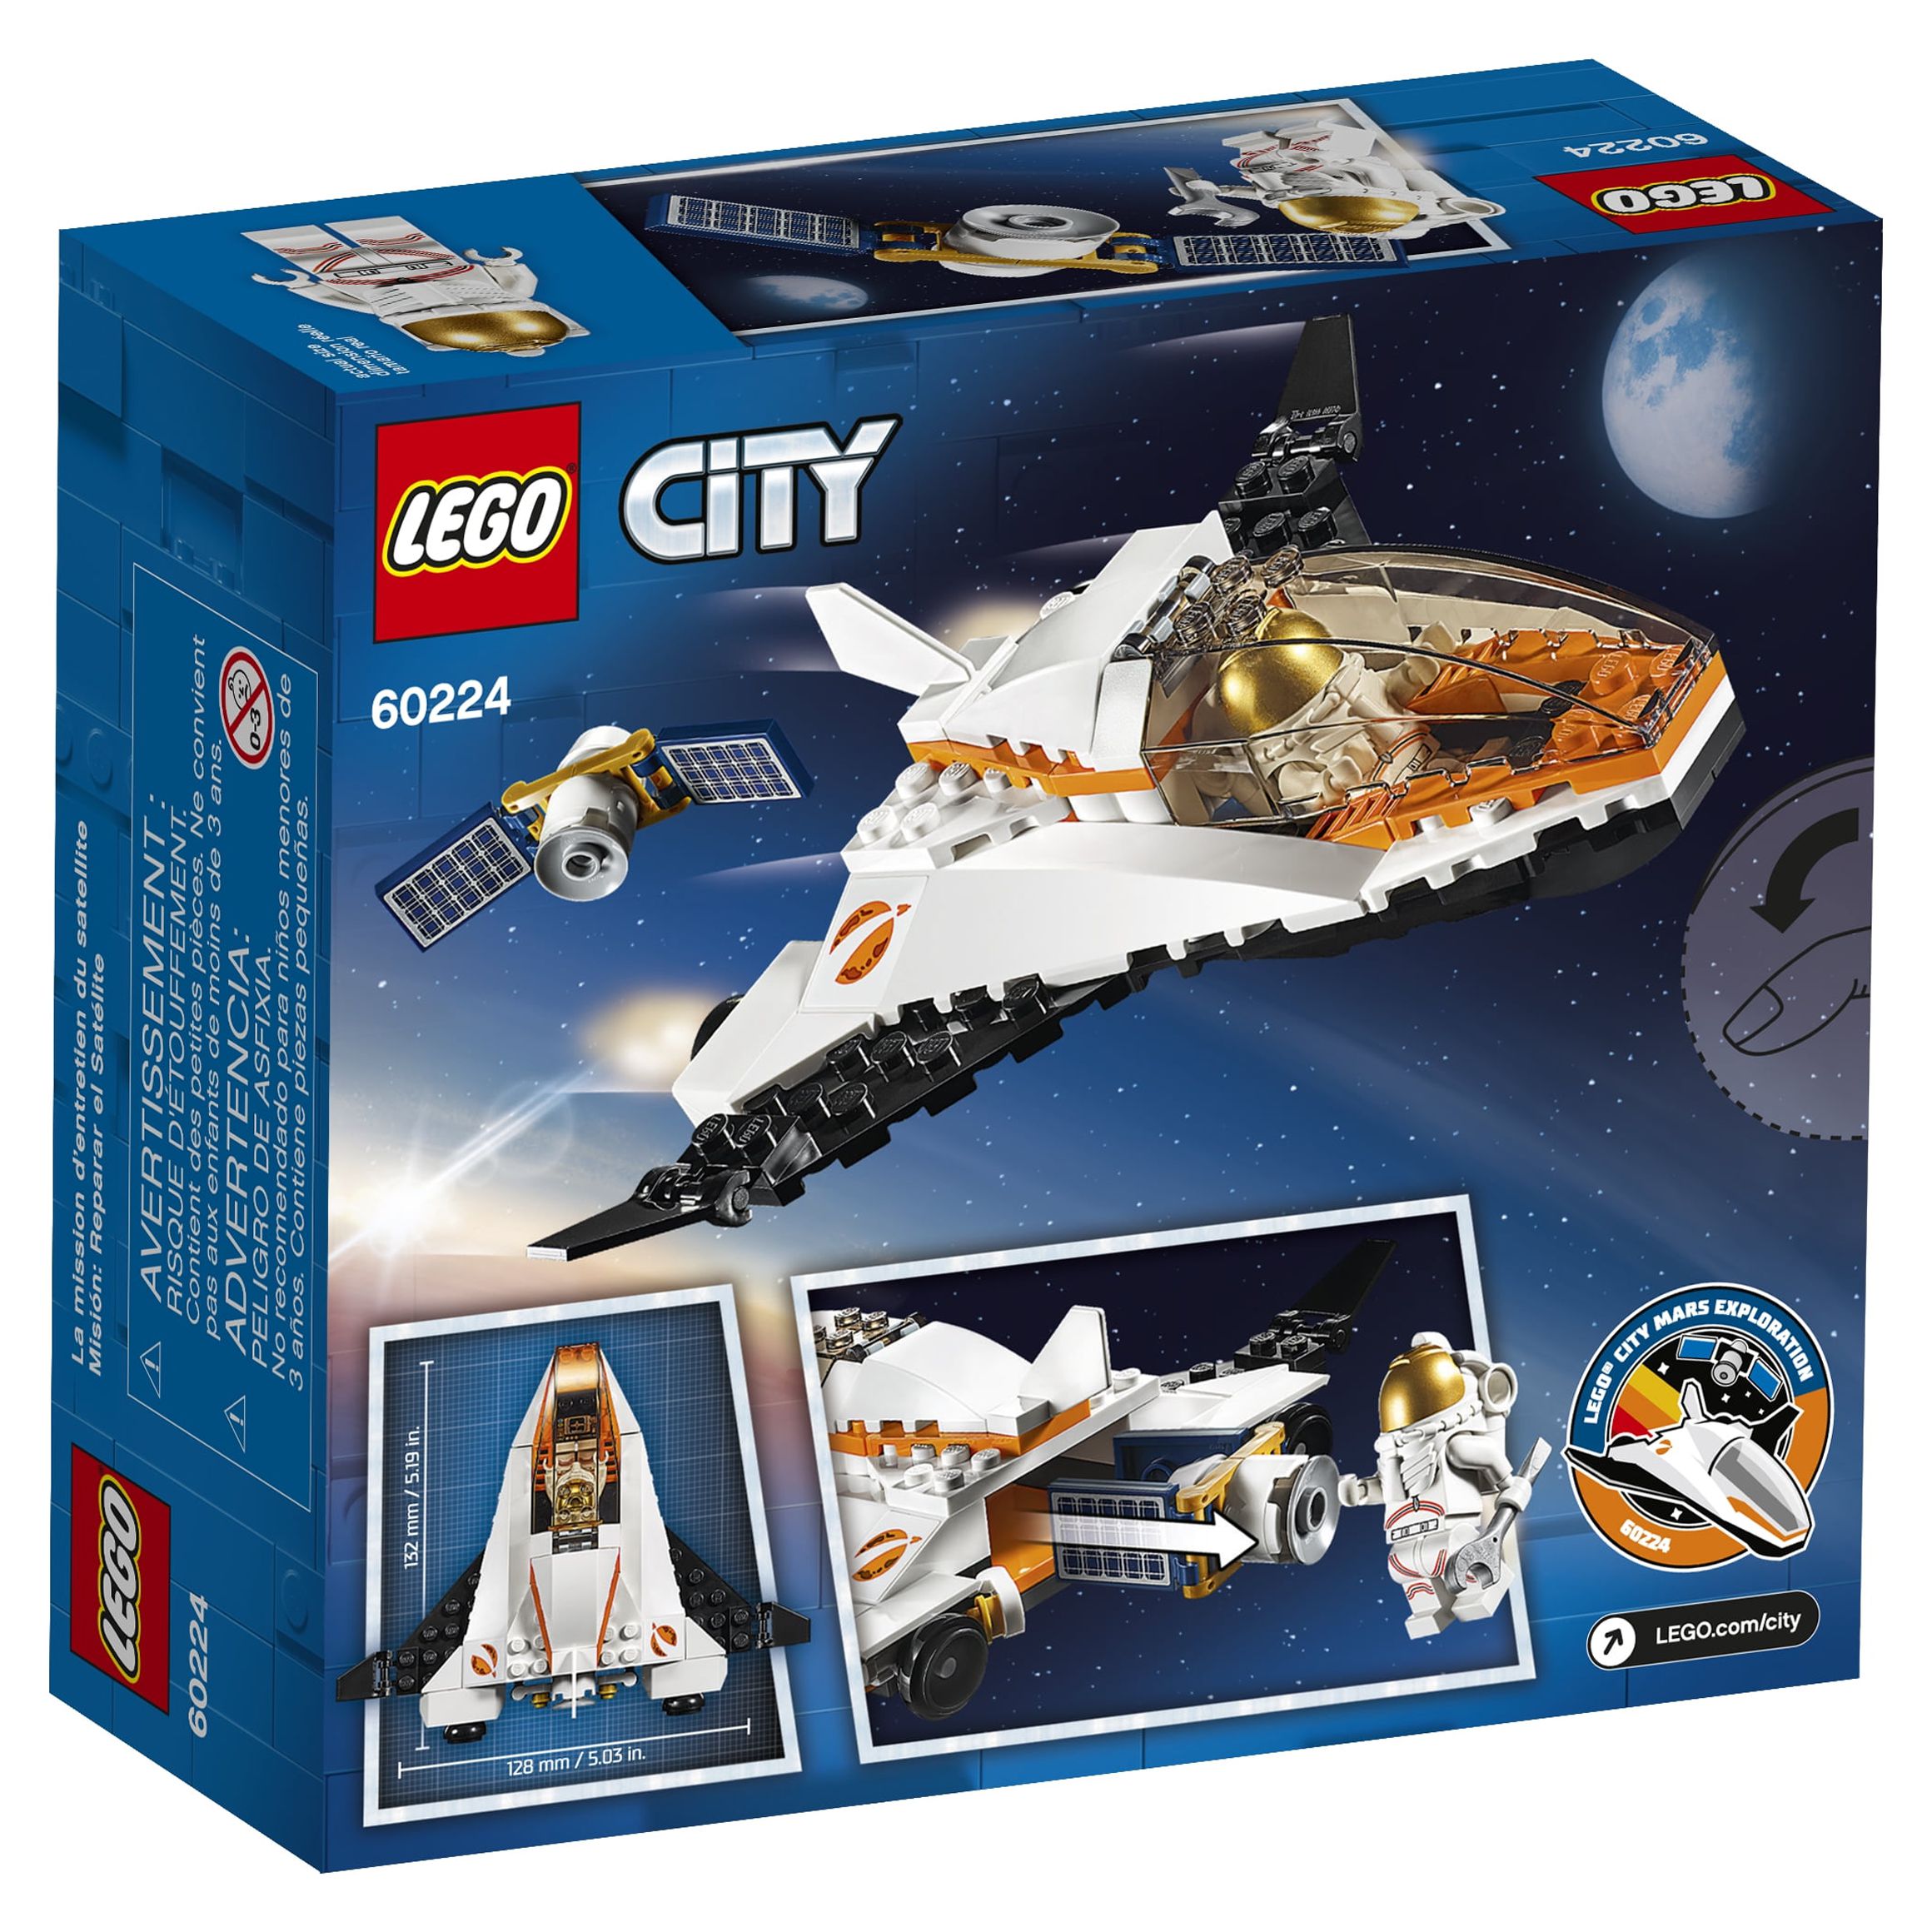 LEGO City Space Satellite Service Mission 60224 Space Shuttle Toy (84 Pieces) - image 5 of 8